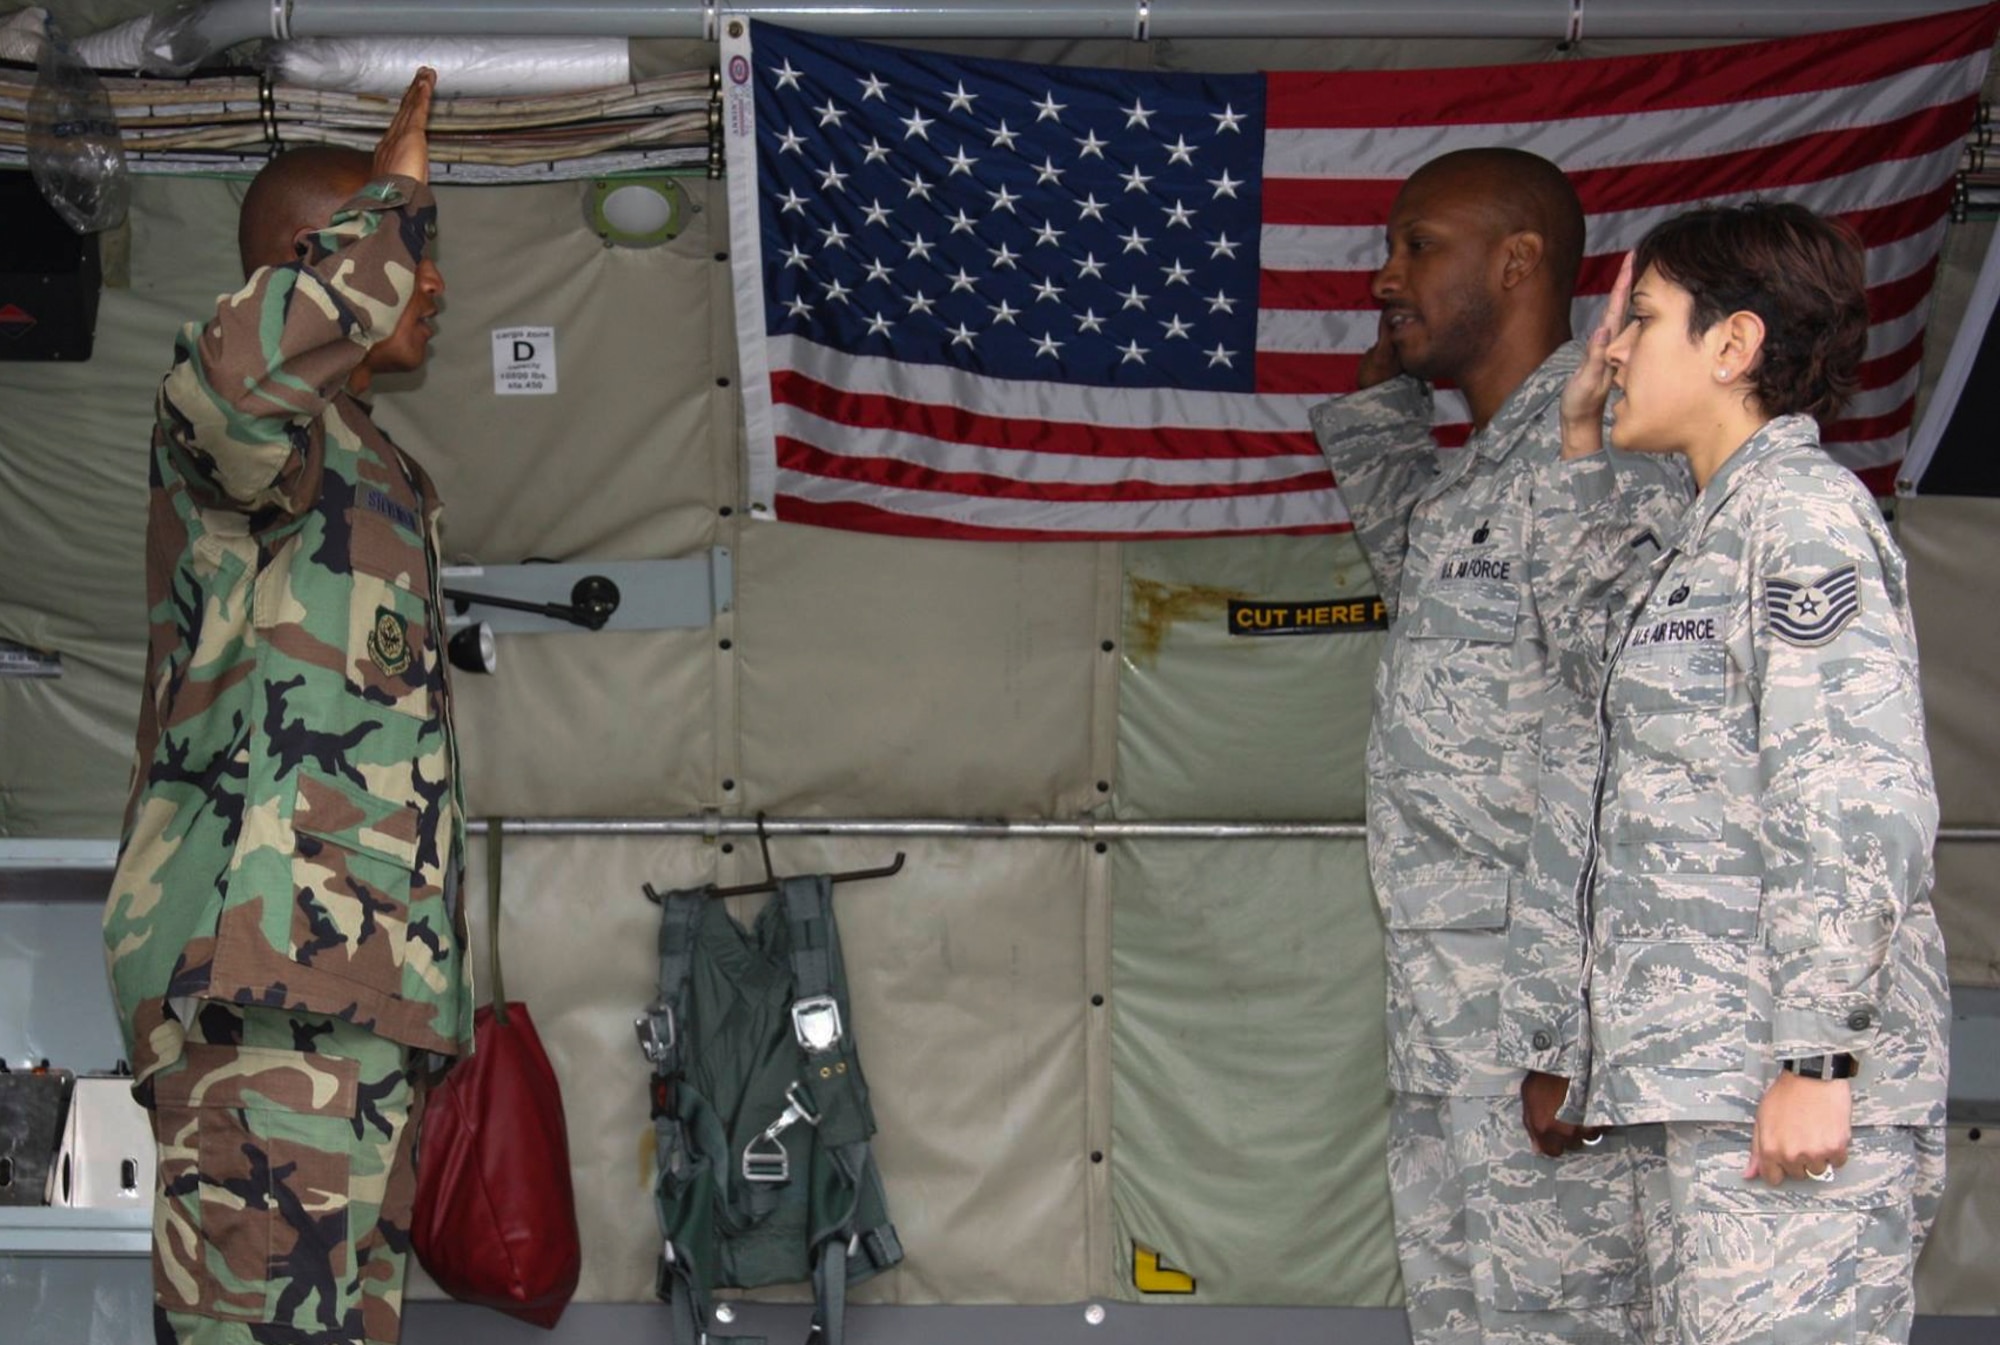 Retired U.S. Air Force Chief Master Sgt. Robinson Joseph, former U.S. Air Forces in Europe – Air Forces Africa Chief Enlisted Manager for the Air Force Installation Contracting Center, and his wife, retired Chief Master Sgt. Leenette Joseph, former USAFE Equal Opportunity functional manager, are pictured during their reenlistment in the Air Force.